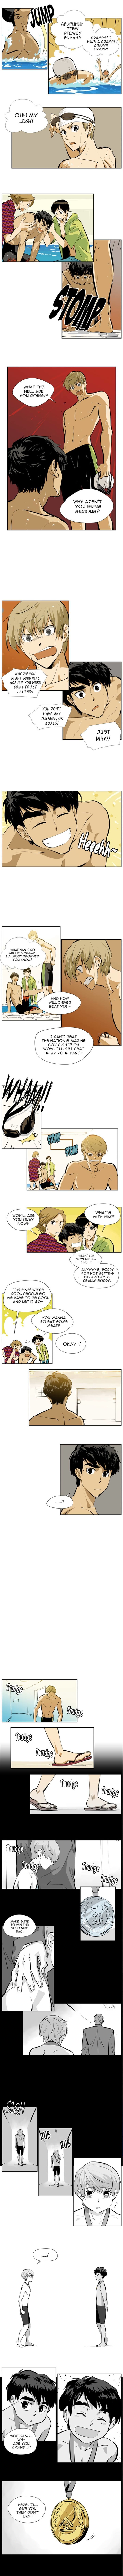 No Breathing - Page 2